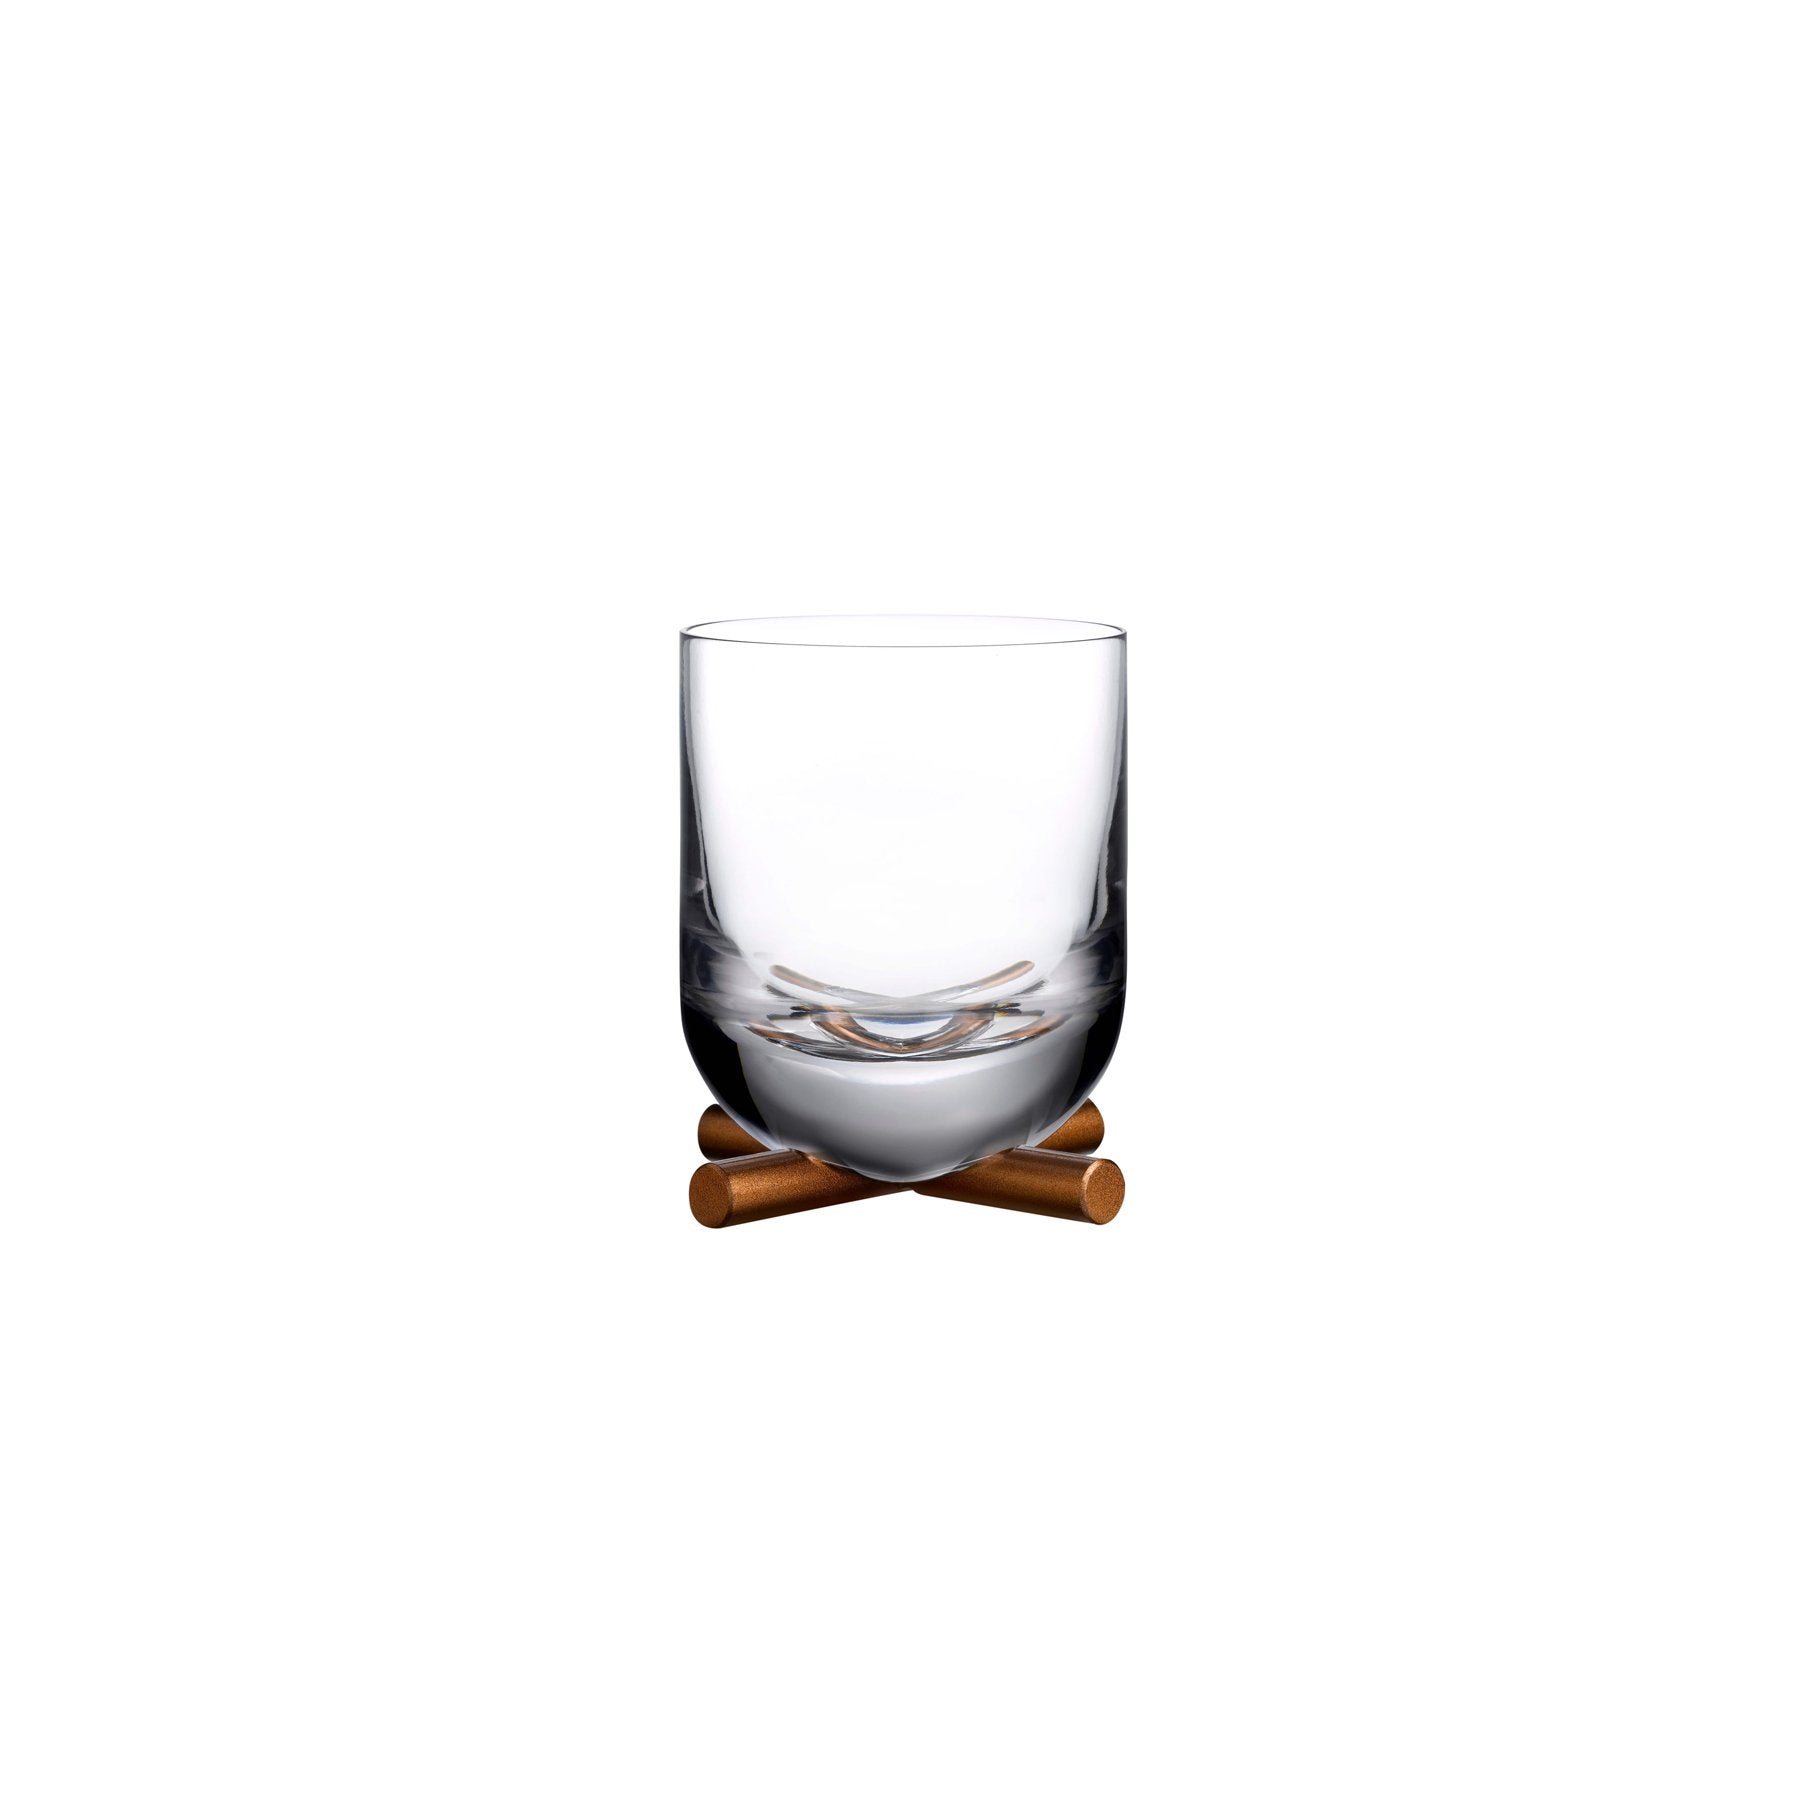 Pottery Barn Finesse Grid Crystal Drinking Glasses - Set of 4